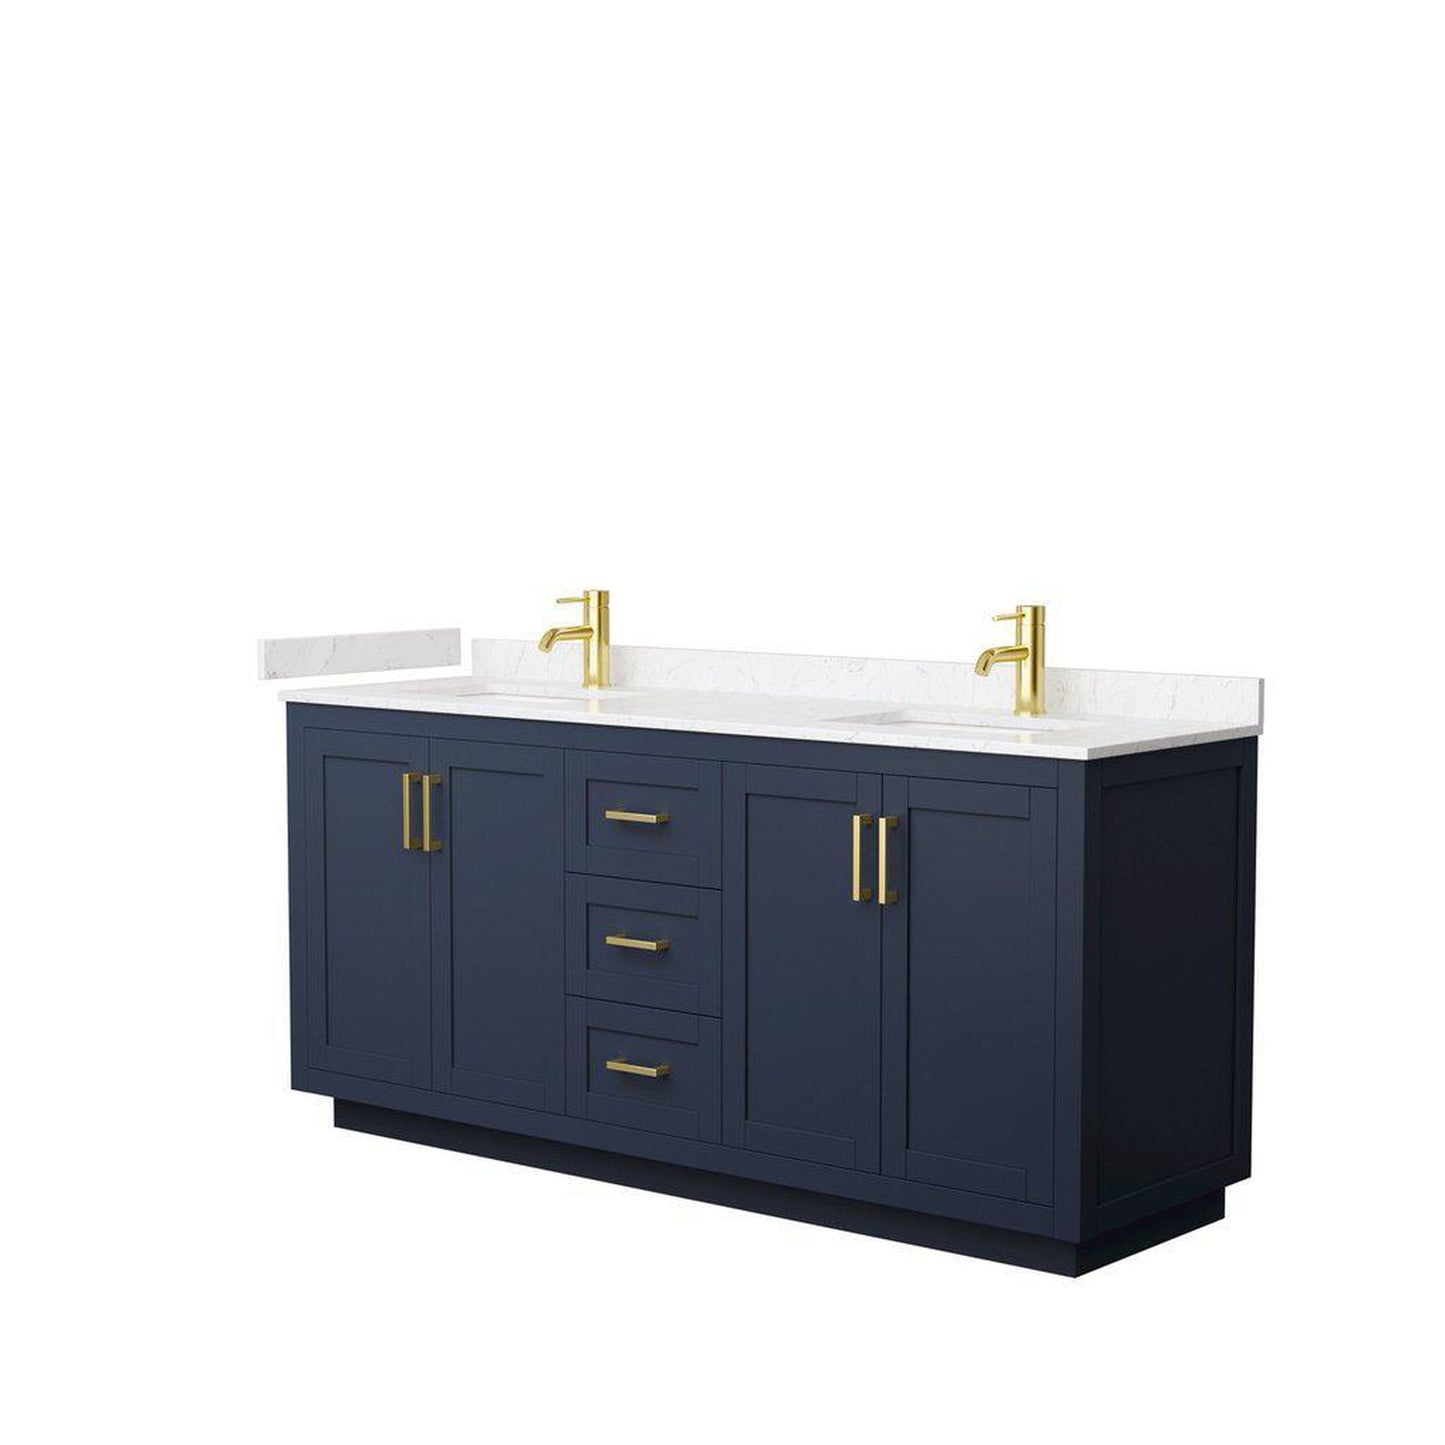 Wyndham Collection Miranda 72" Double Bathroom Dark Blue Vanity Set With Light-Vein Carrara Cultured Marble Countertop, Undermount Square Sink, And Brushed Gold Trim